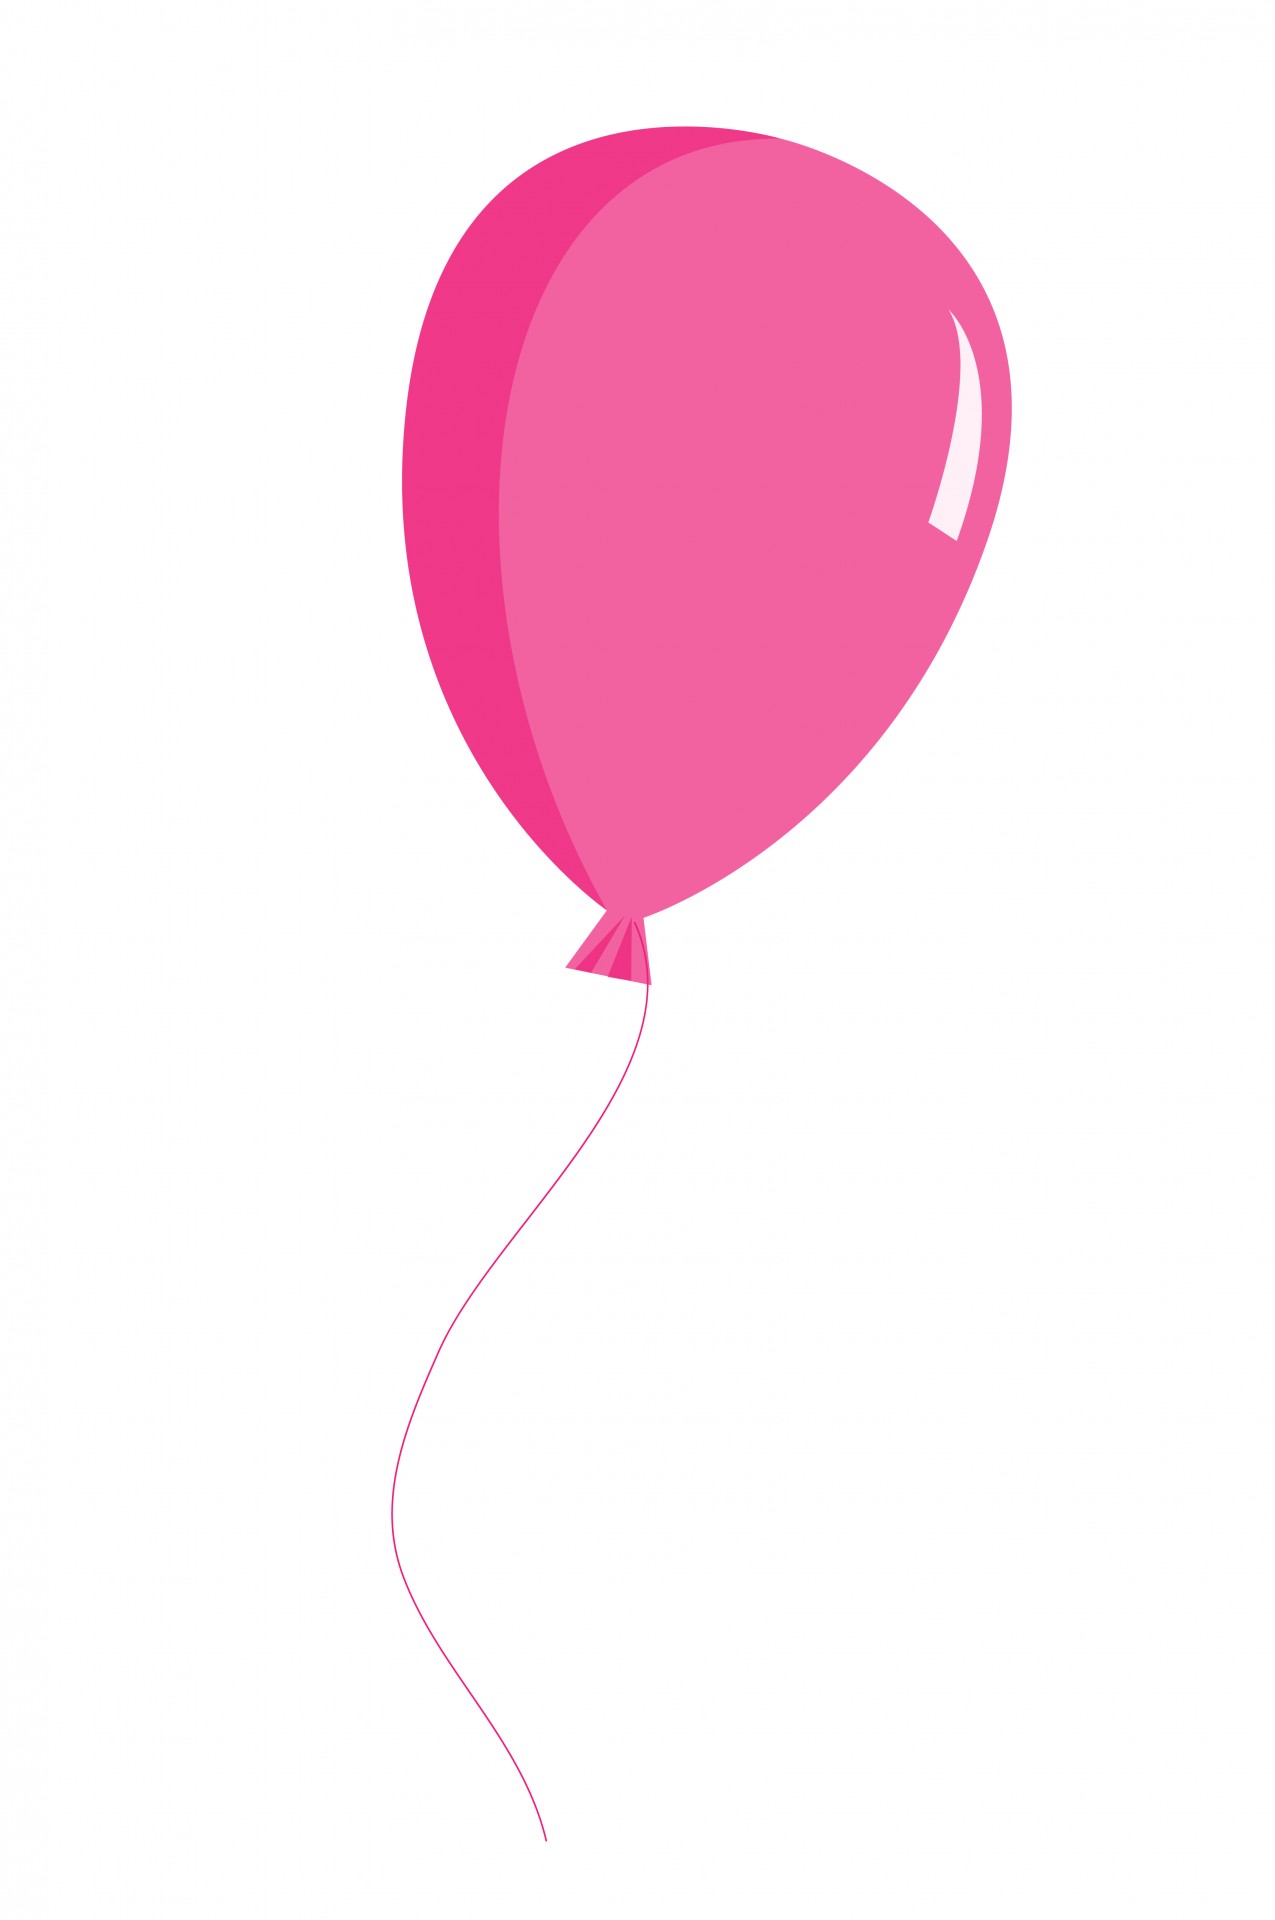 clipart picture of balloon - photo #27